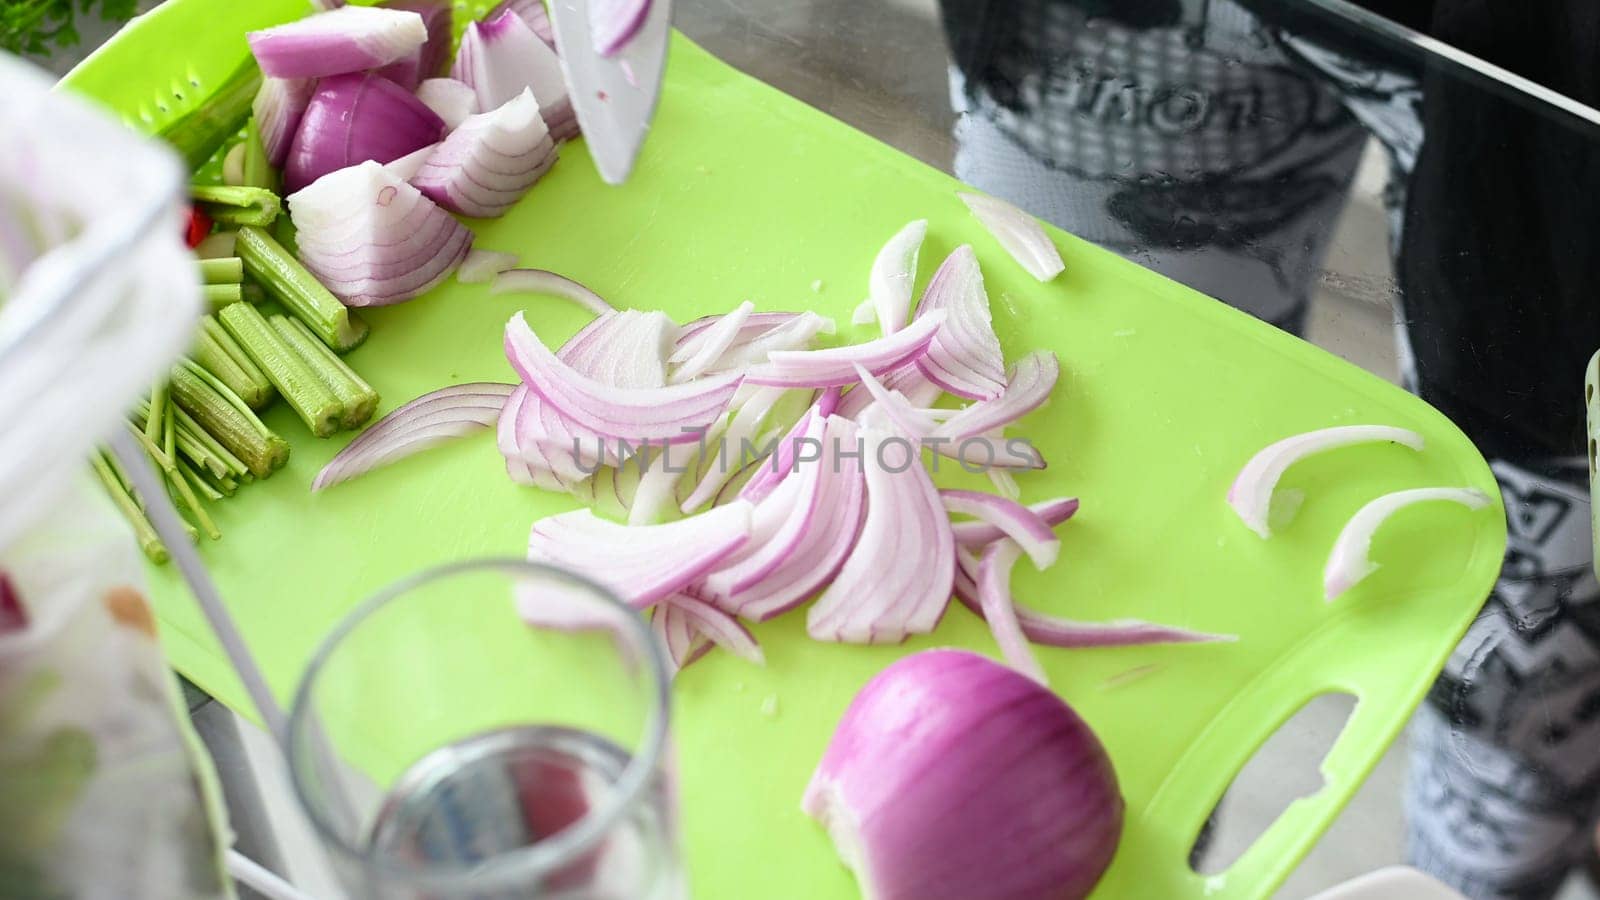 Chopping onion, close-up. Red onions close up. Female hands cut onions in the kitchen. The woman cuts onions on a yellow plastic board. by Peruphotoart